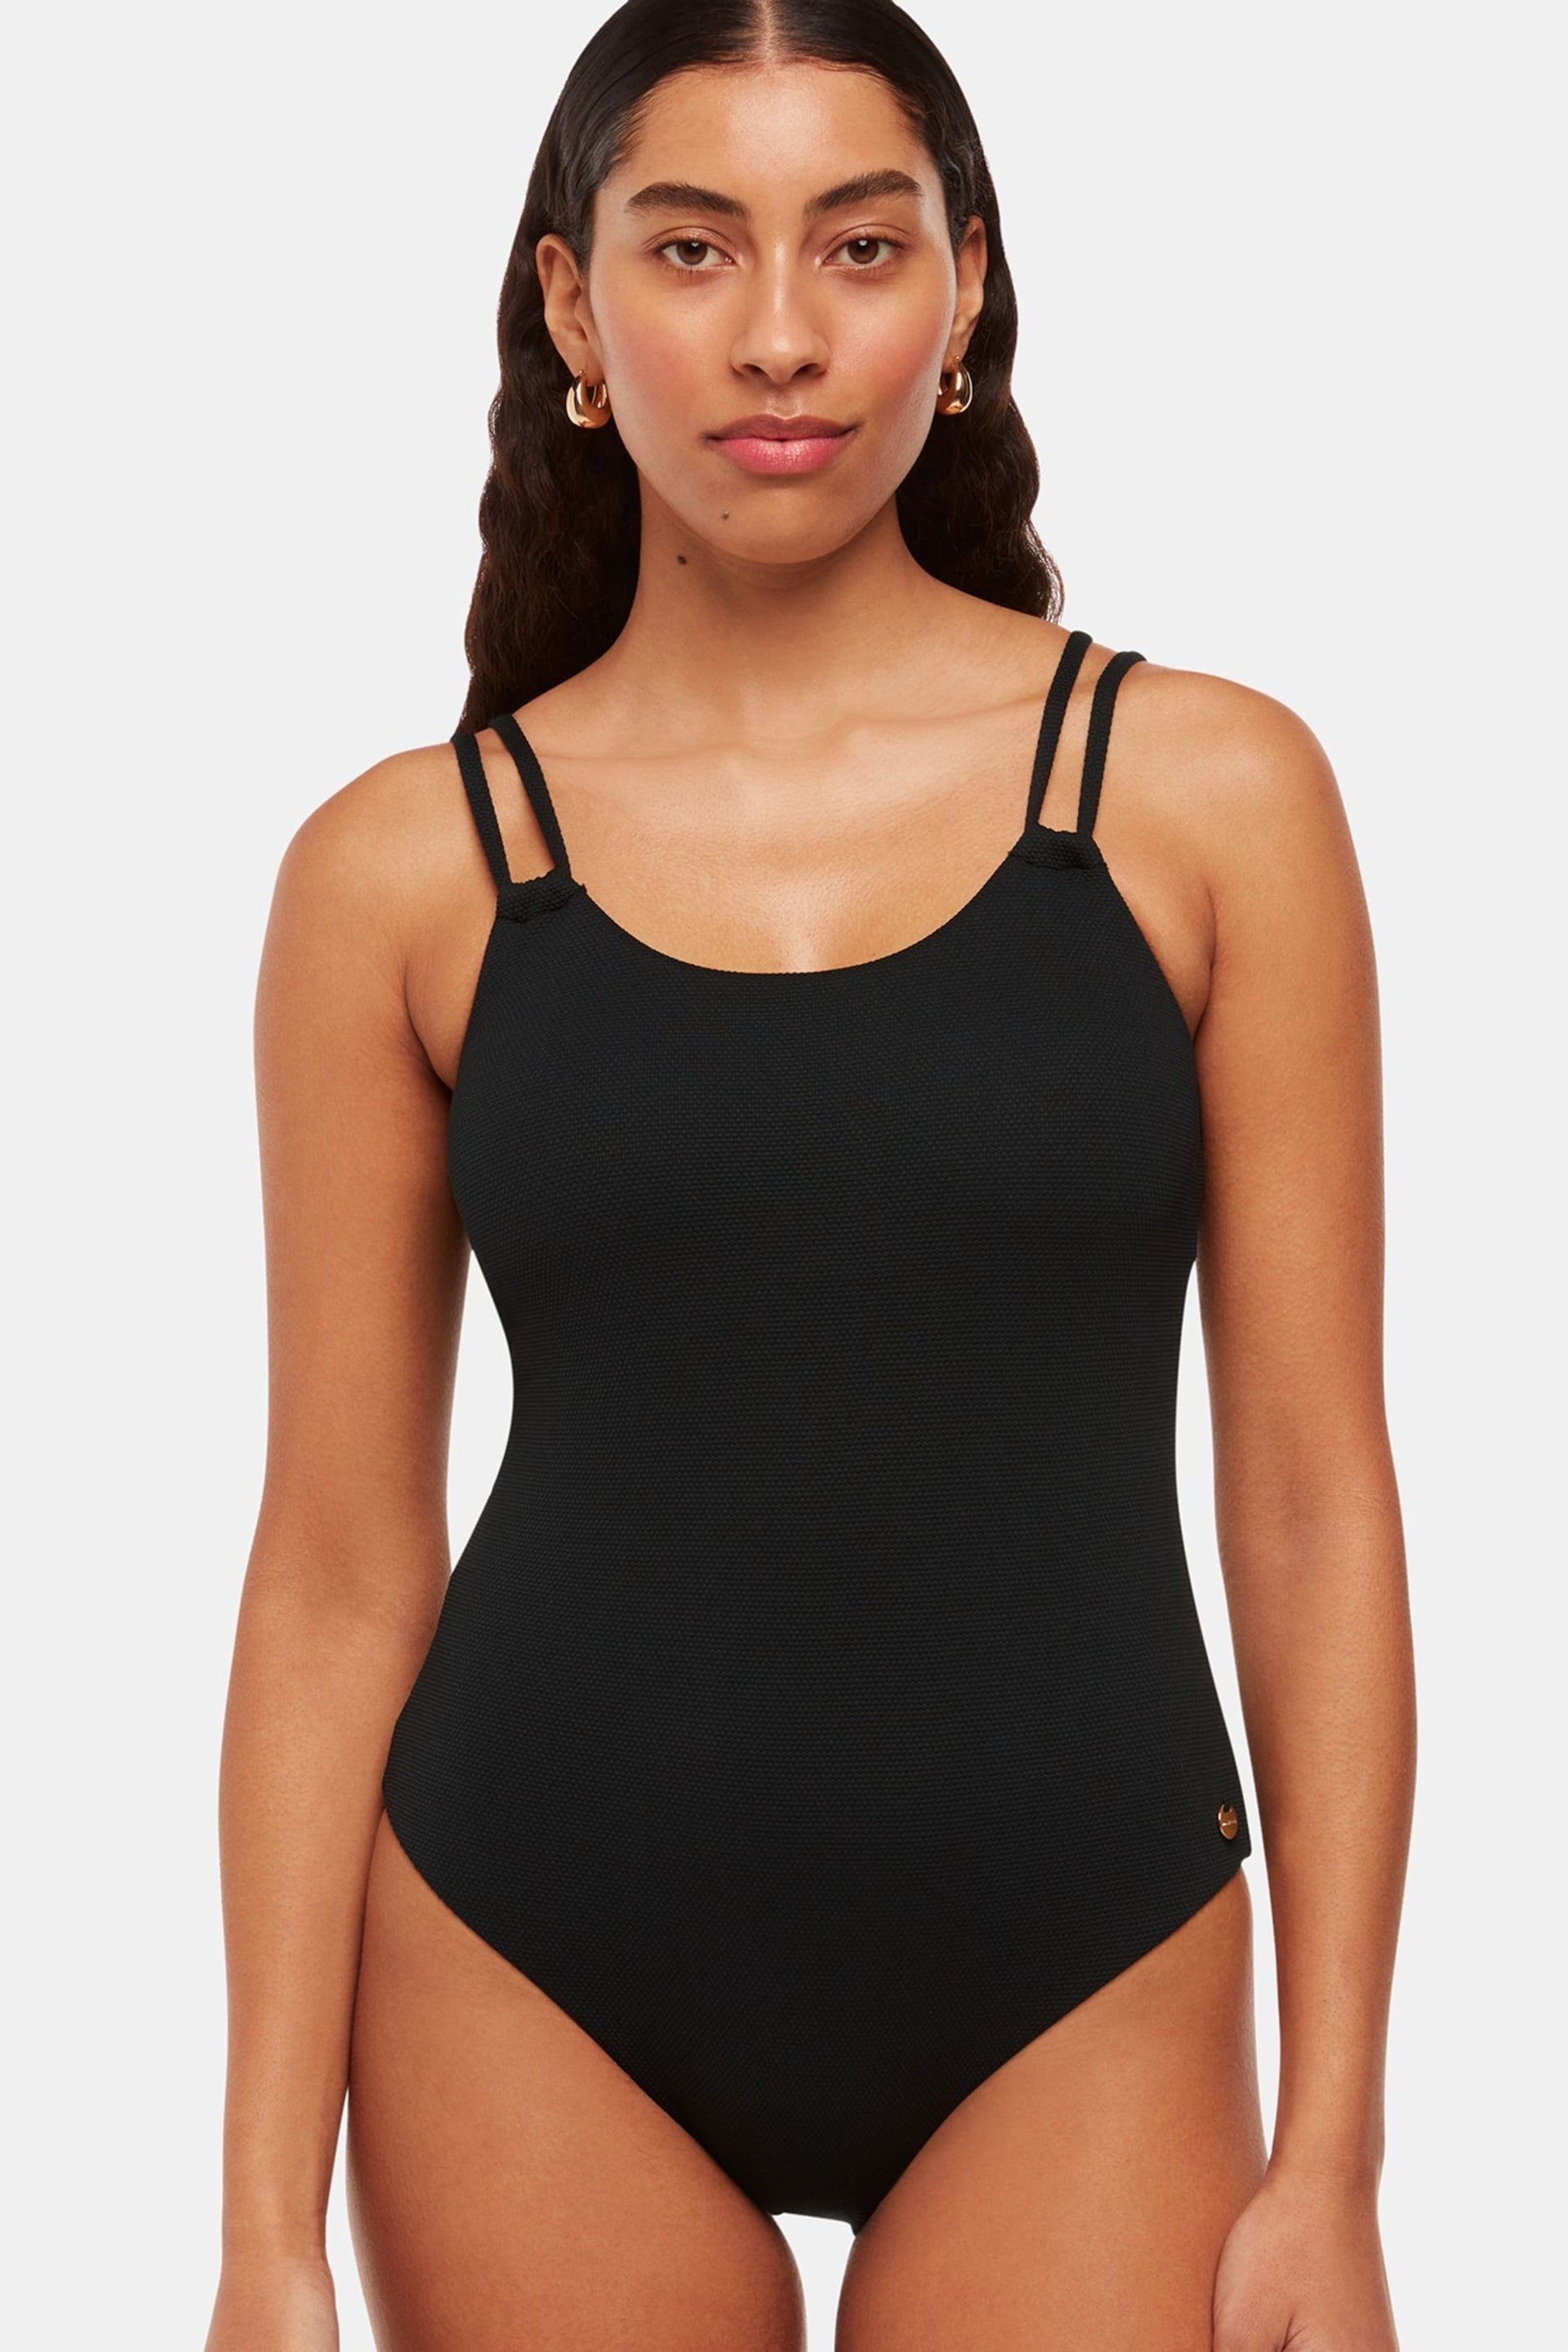 Whistles Double Strap Textured Black Swimsuit - Image 1 of 5